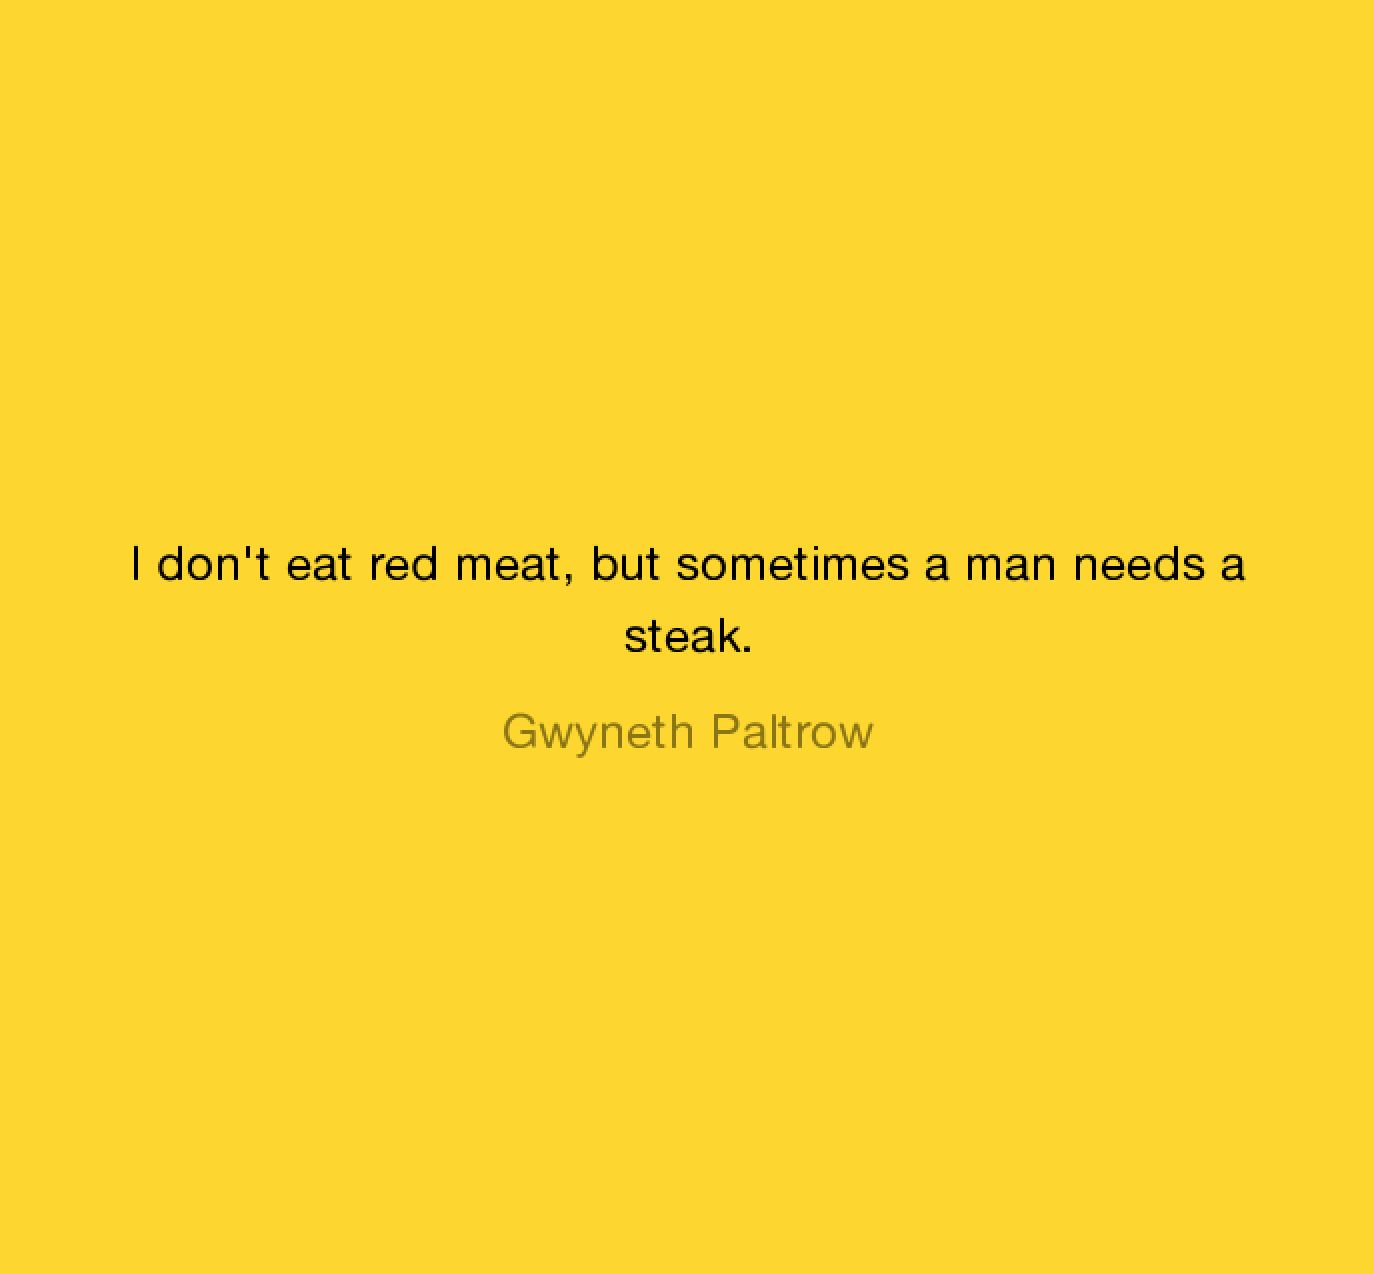 Insane Gwyneth Paltrow Quotes - angle - I don't eat red meat, but sometimes a man needs a steak. Gwyneth Paltrow